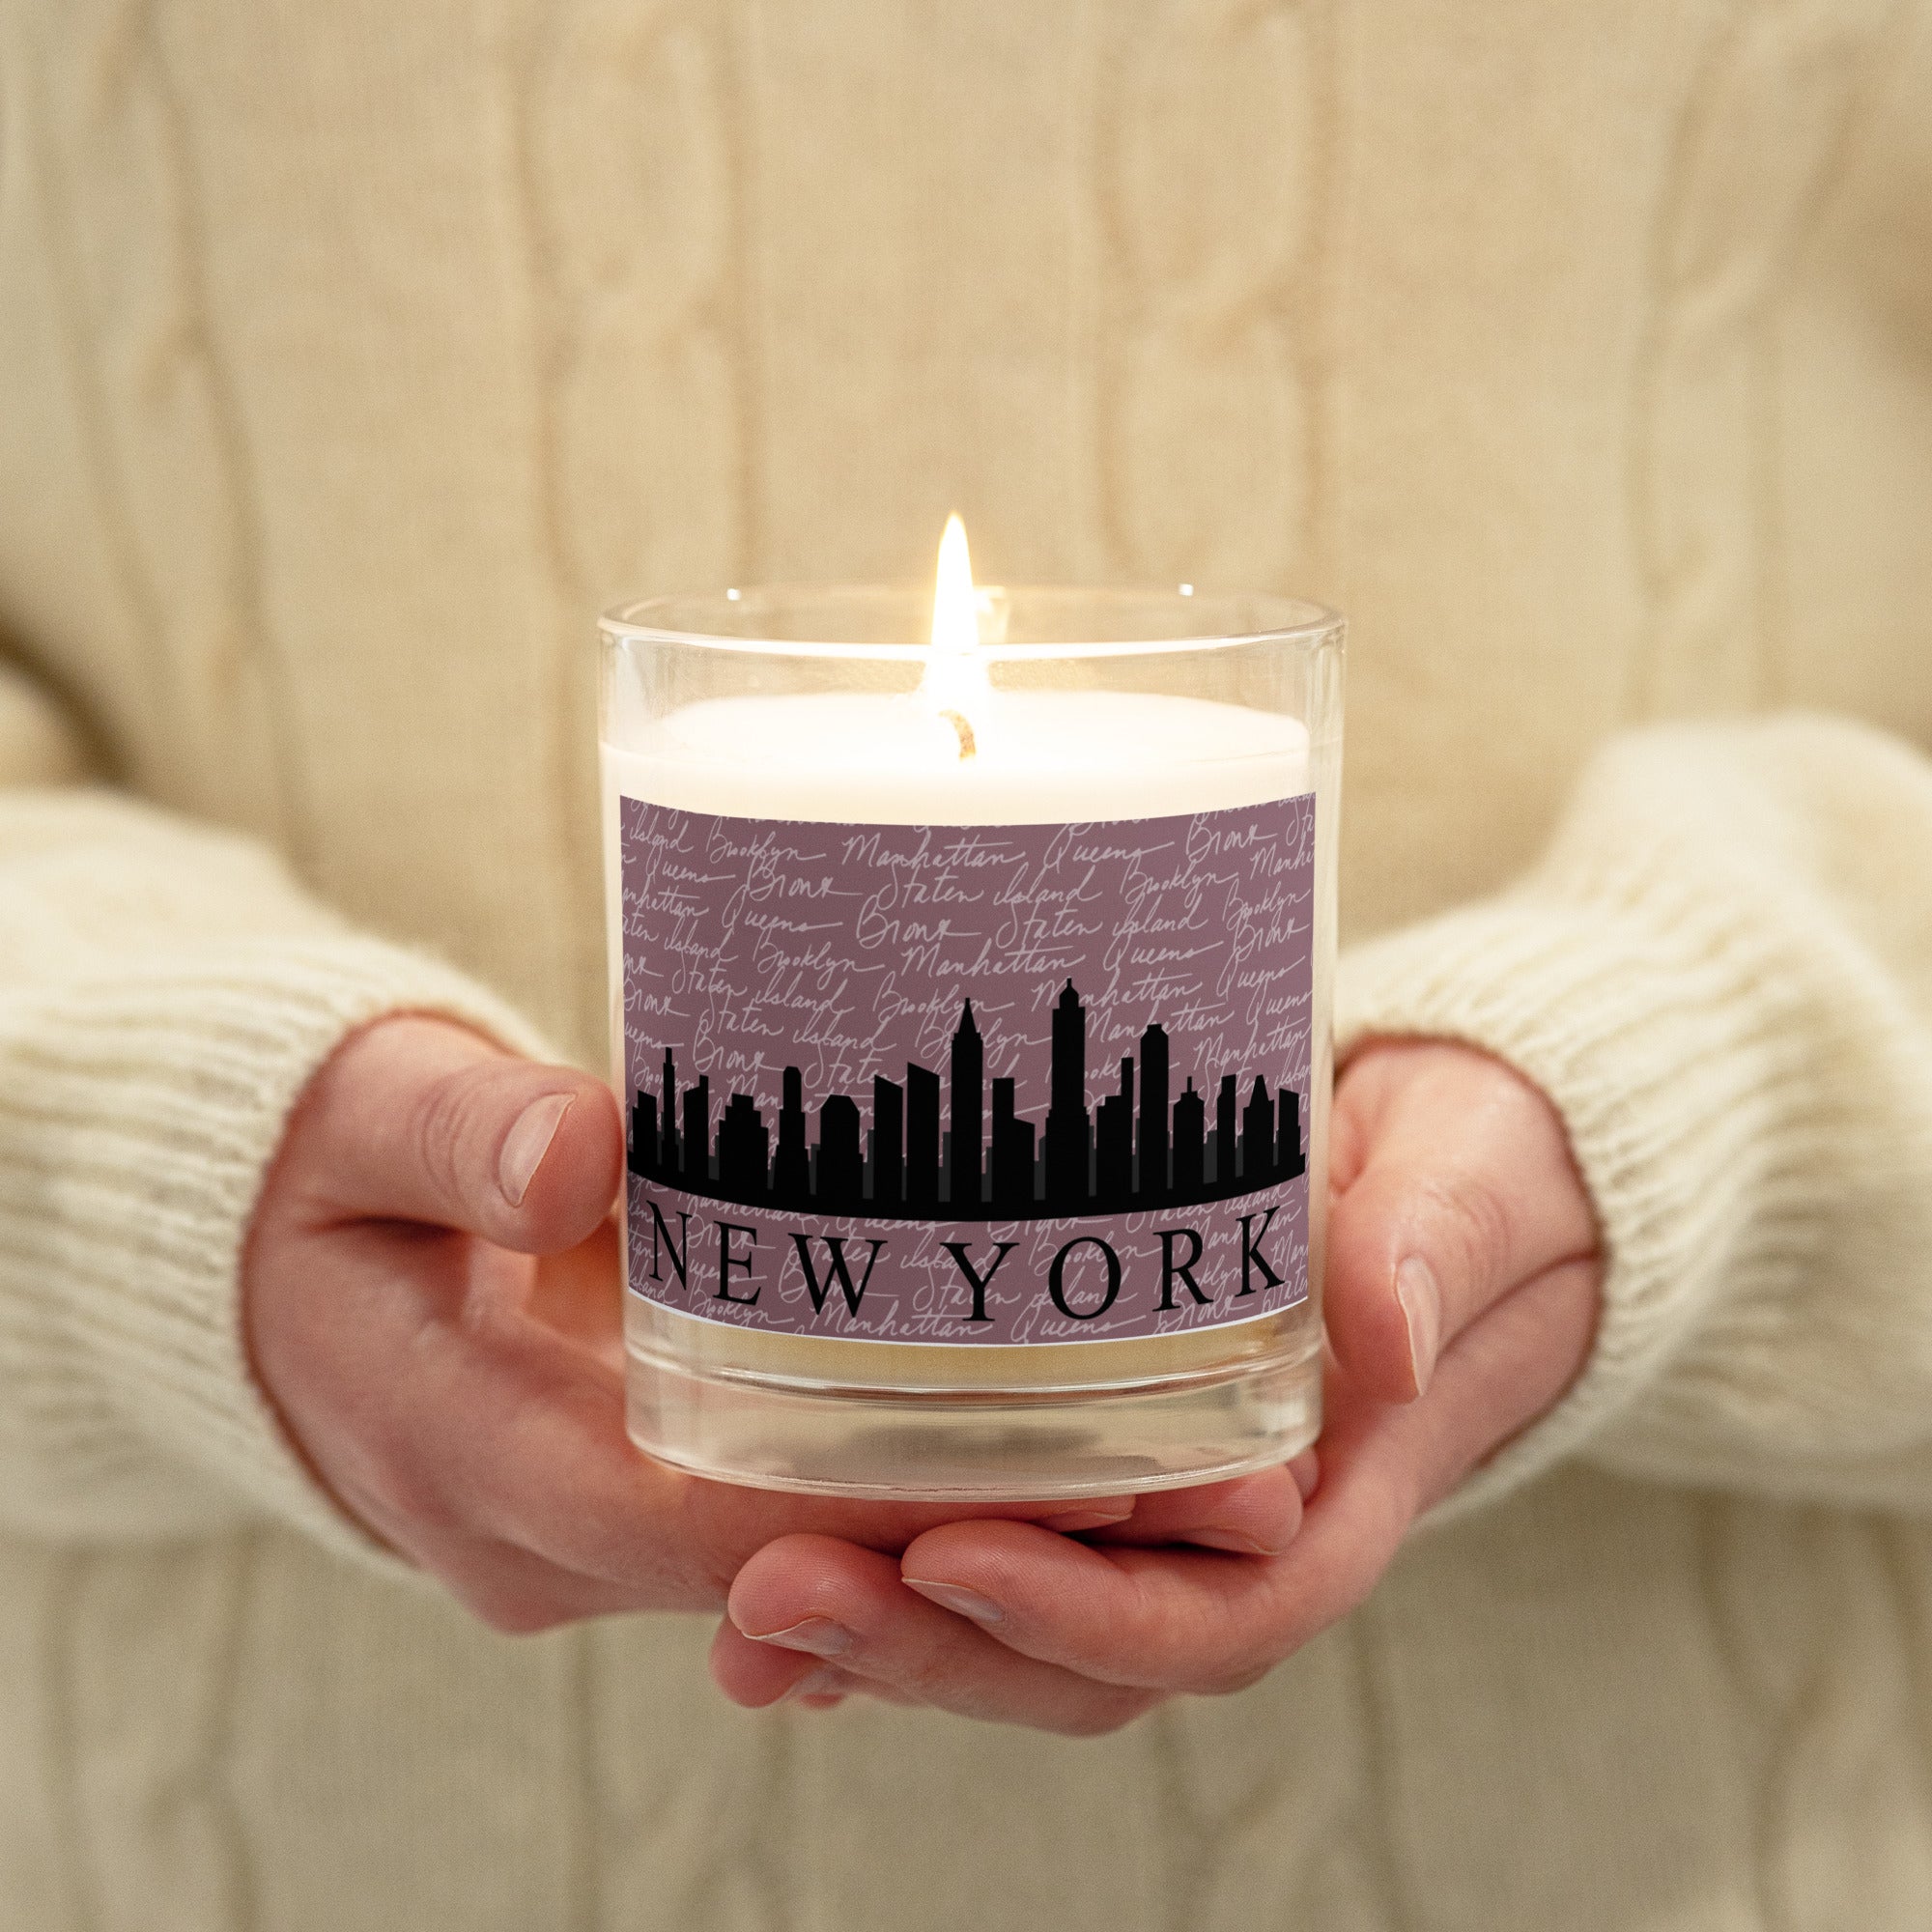 New York Glass jar soy wax candle